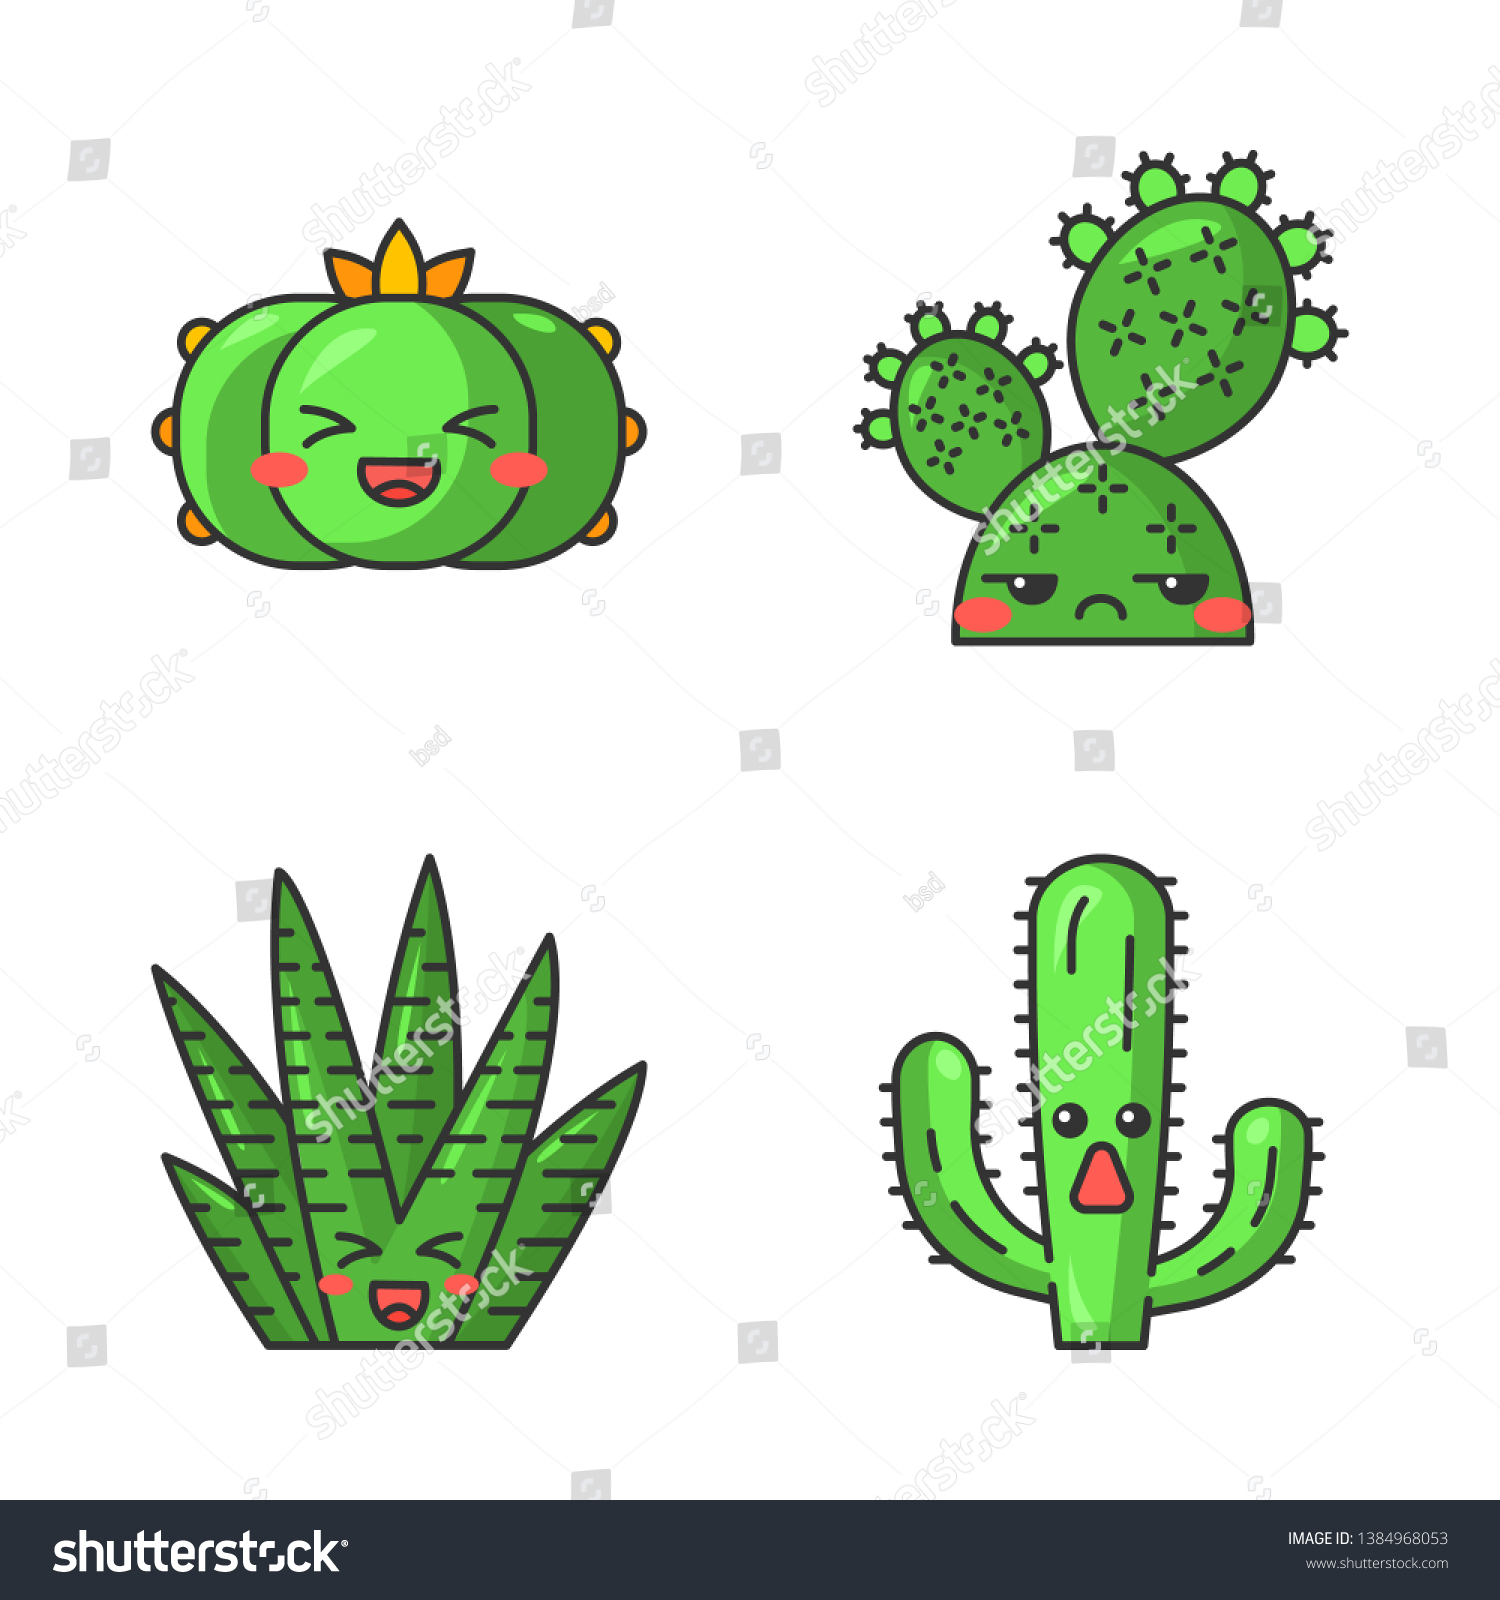 SVG of Cactuses cute kawaii vector characters. Plants with smiling faces. Laughing peyote and zebra cactuses. Unamused prickly pear wild cacti. Funny emoji, emoticon set. Isolated cartoon color illustration svg